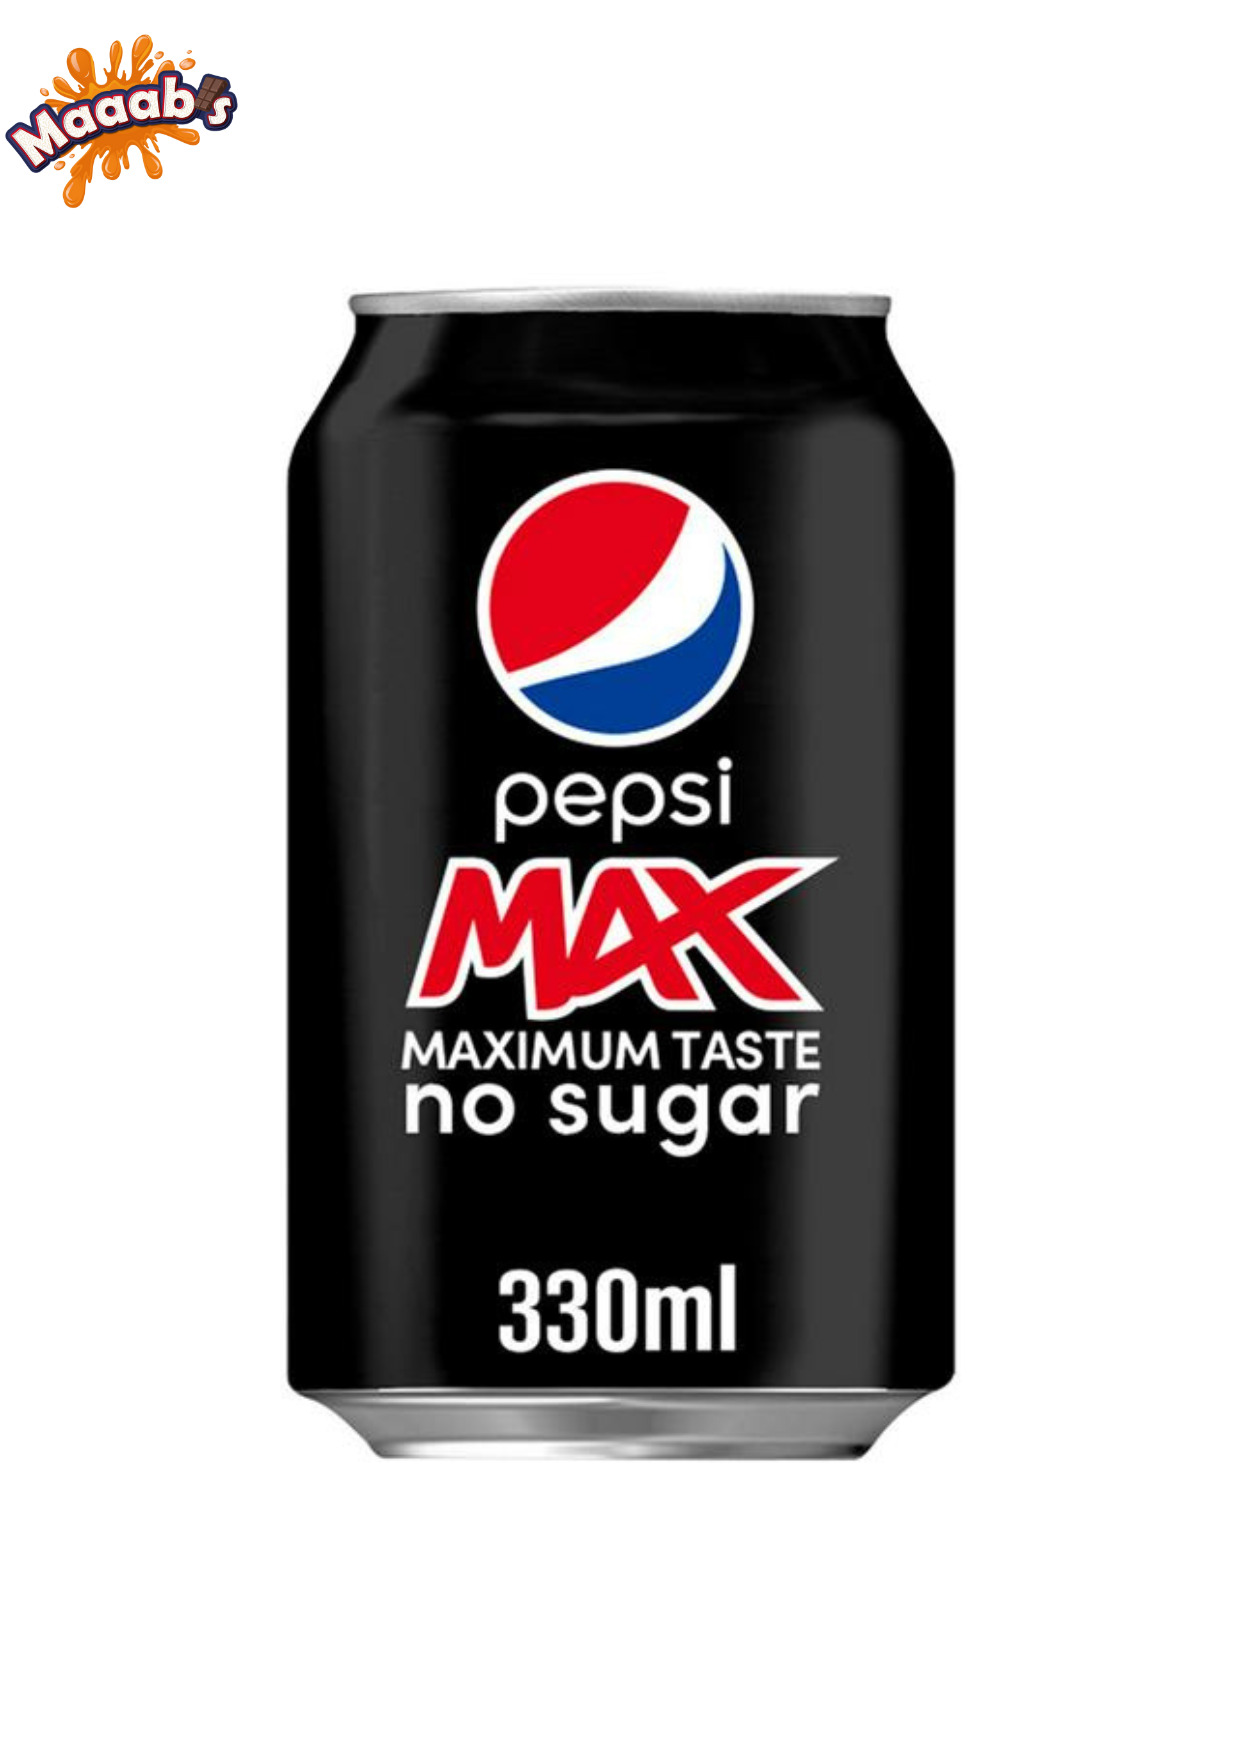 24 x Pepsi Max Cherry Soft Drink Cans 330ml FREE TRACKED DELIVERY